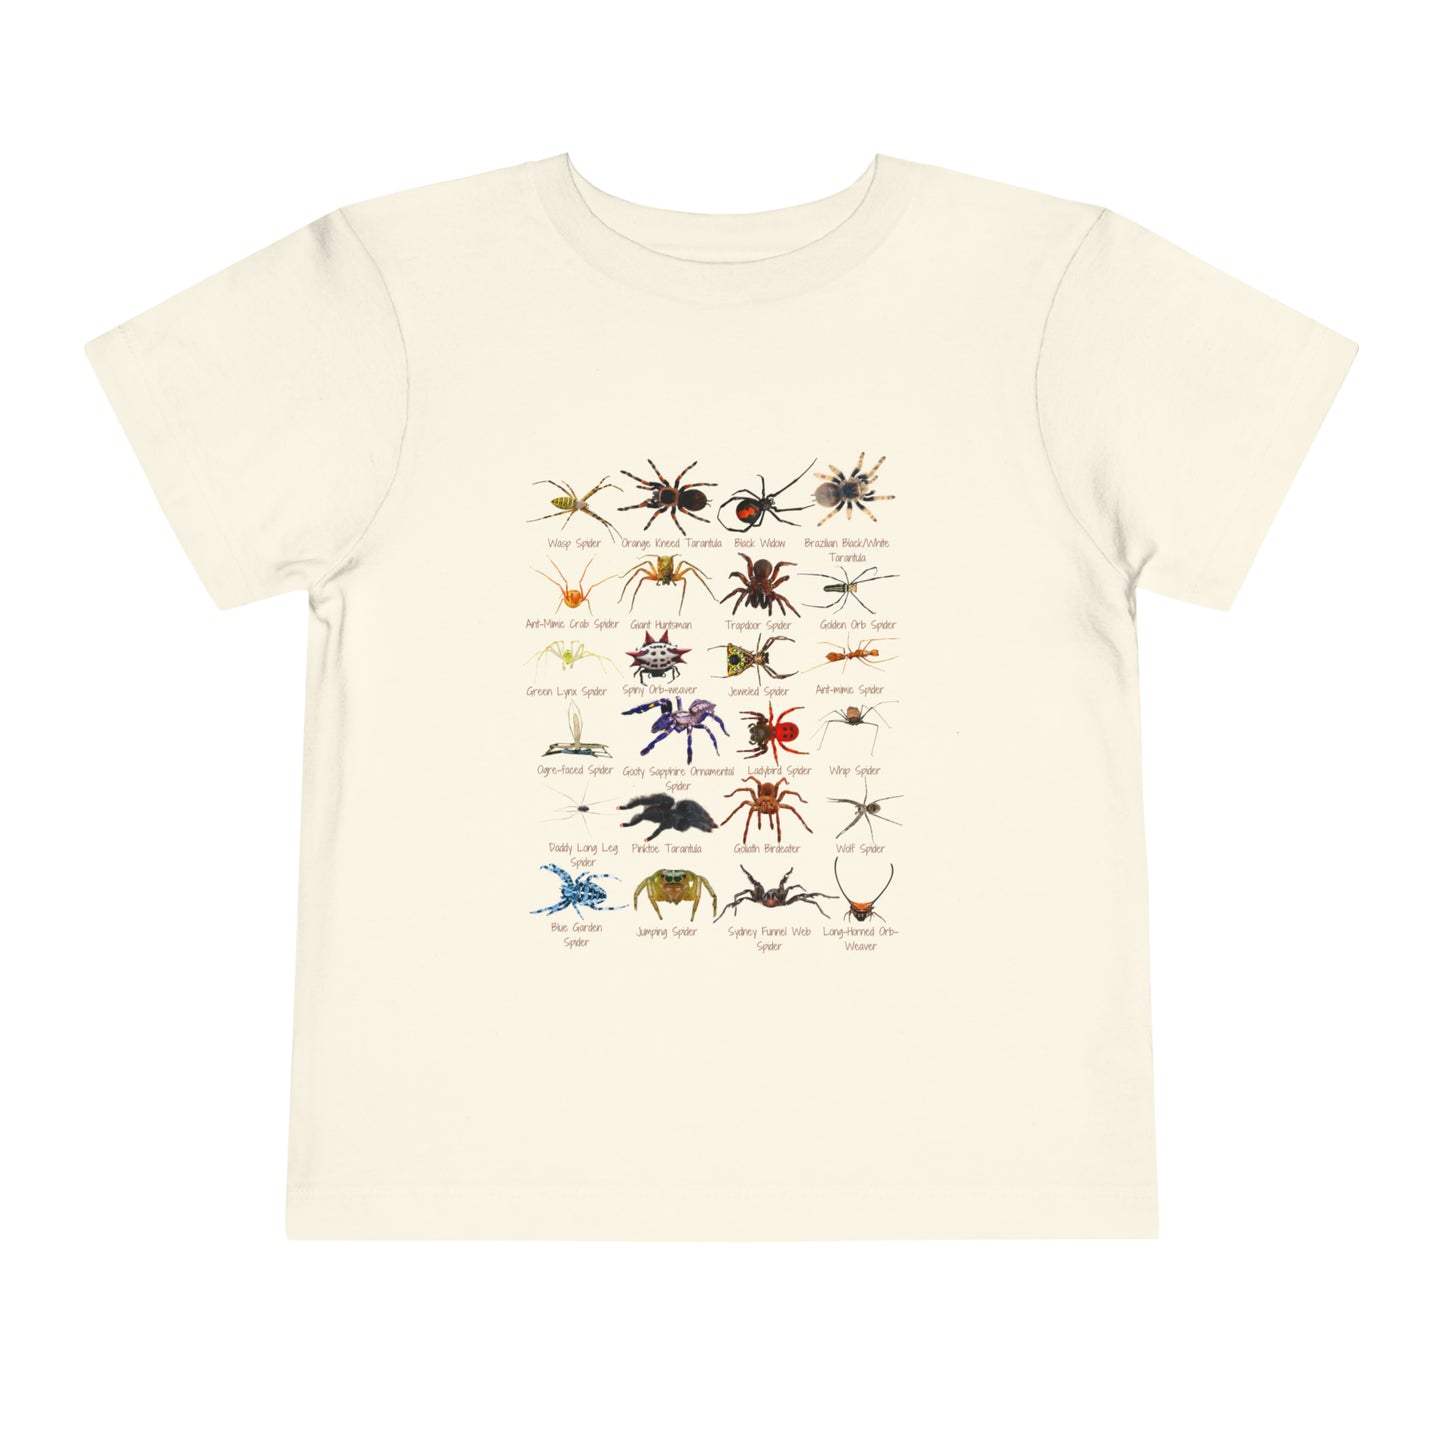 Stupendous Spiders Toddler T-shirt